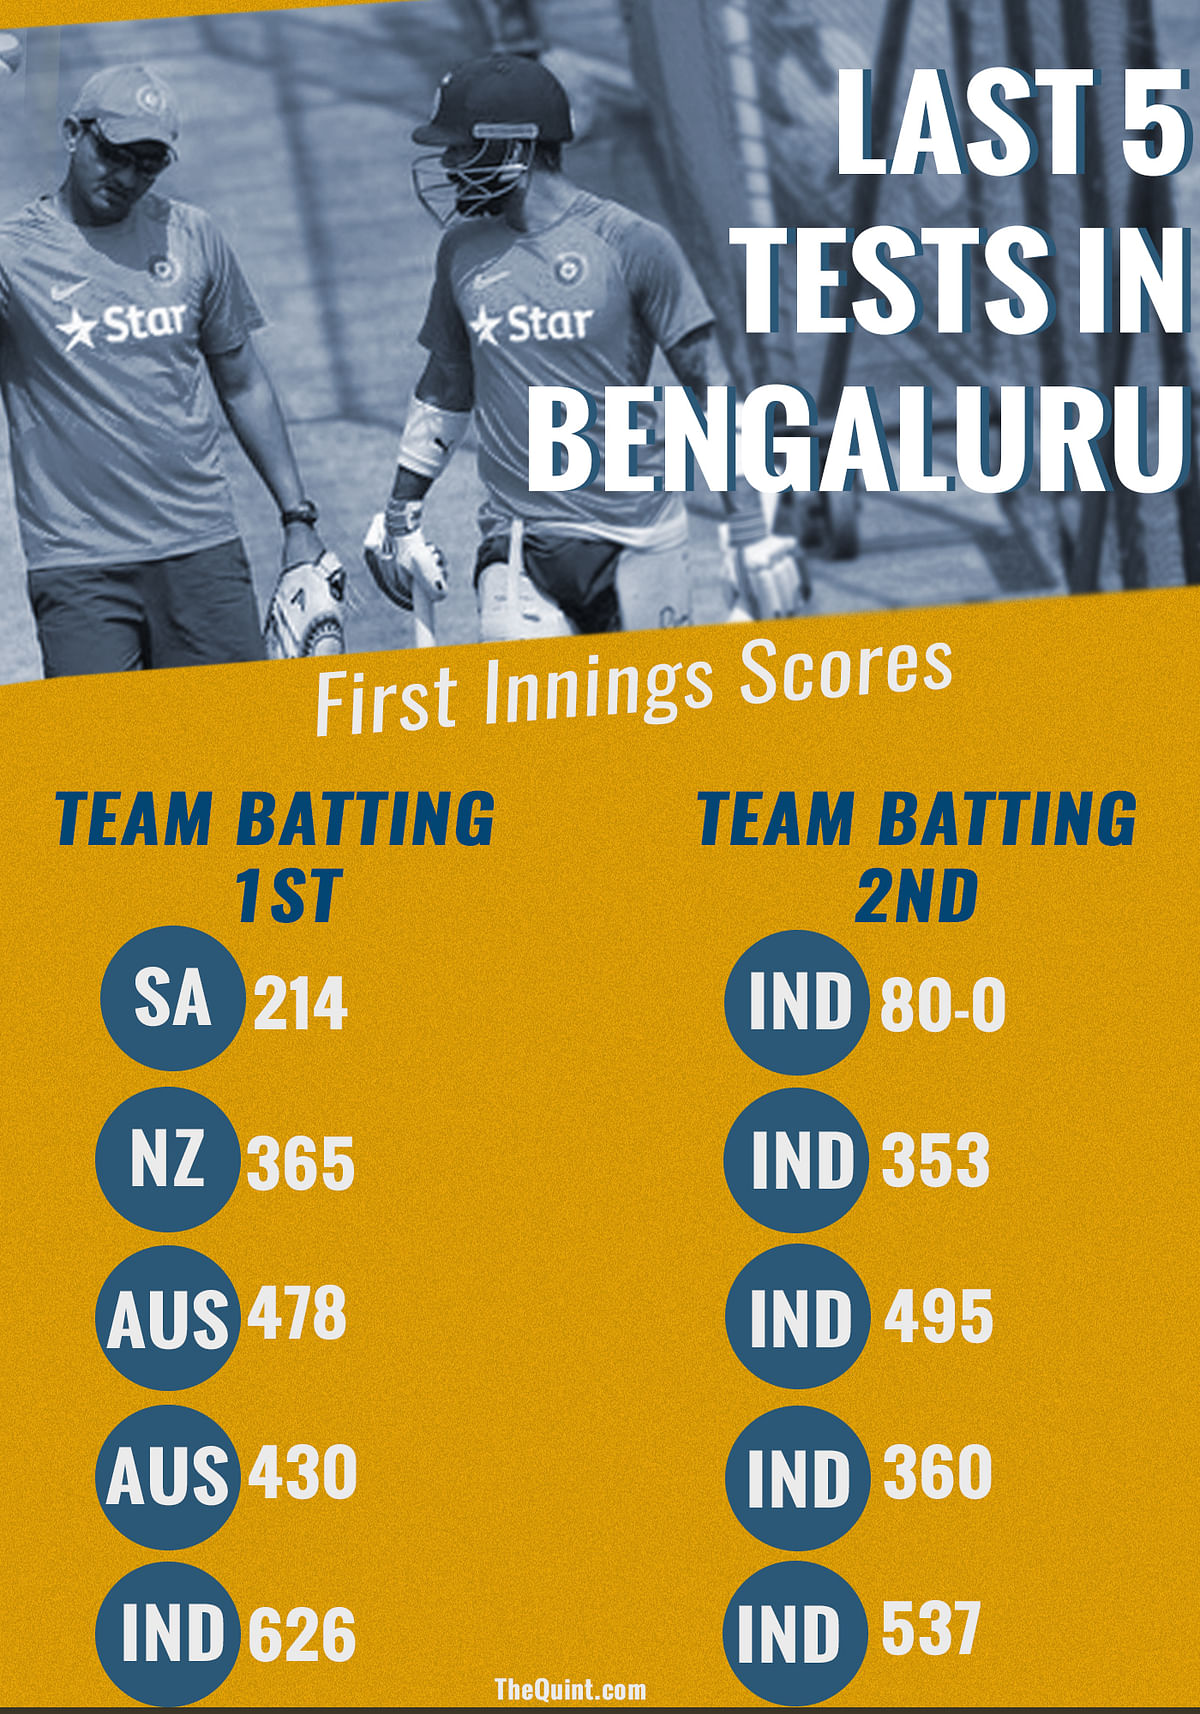 Not one player in the Australian team has played a Test match in Bangalore before.